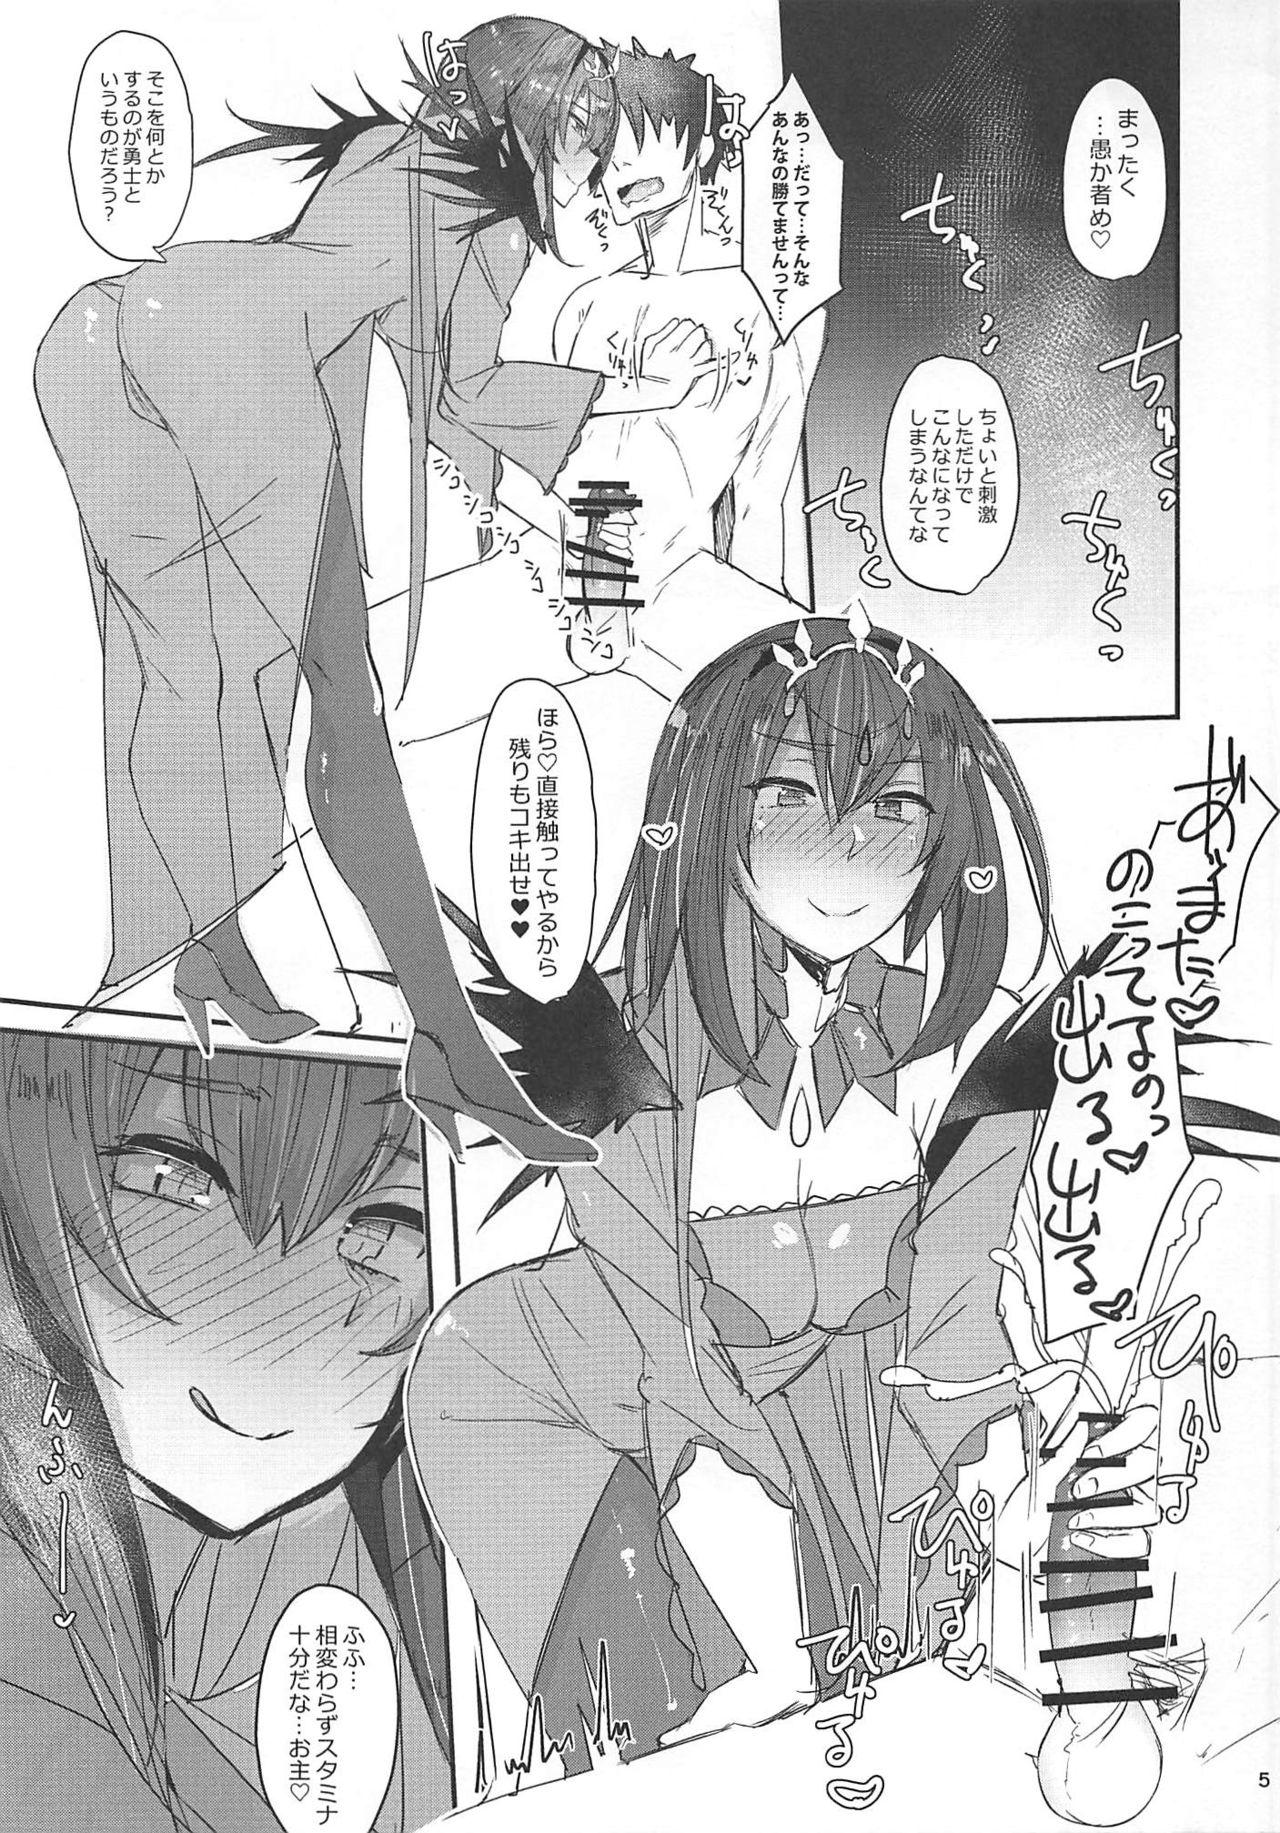 Cheerleader Funde Scathach-sama - Fate grand order Tight Cunt - Page 5